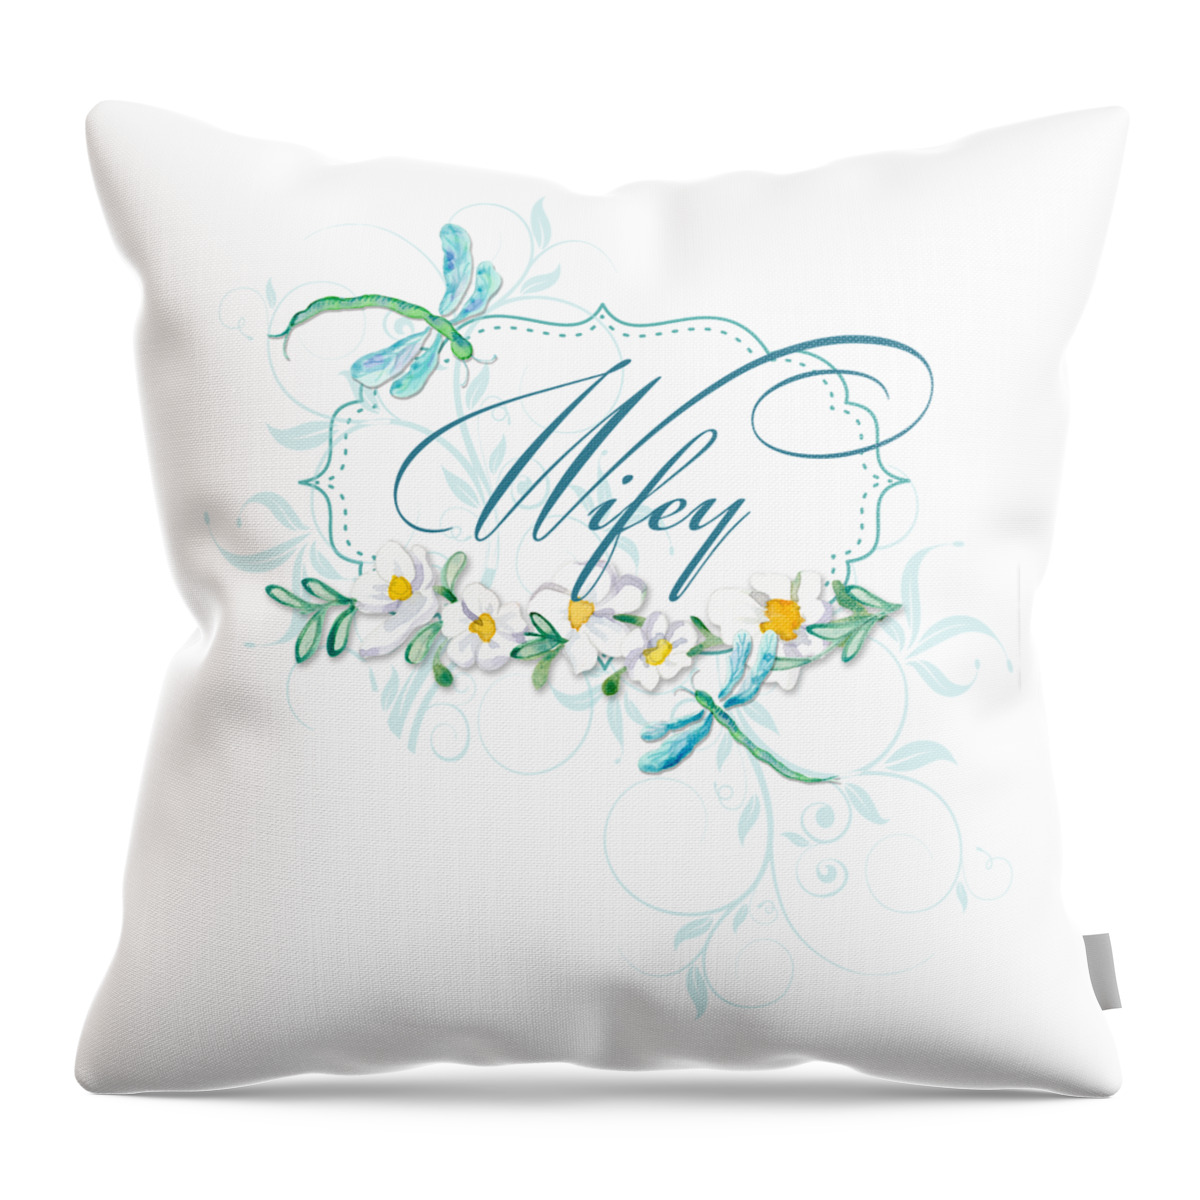 Wife Throw Pillow featuring the painting Wifey New Bride Dragonfly w Daisy Flowers n Swirls by Audrey Jeanne Roberts